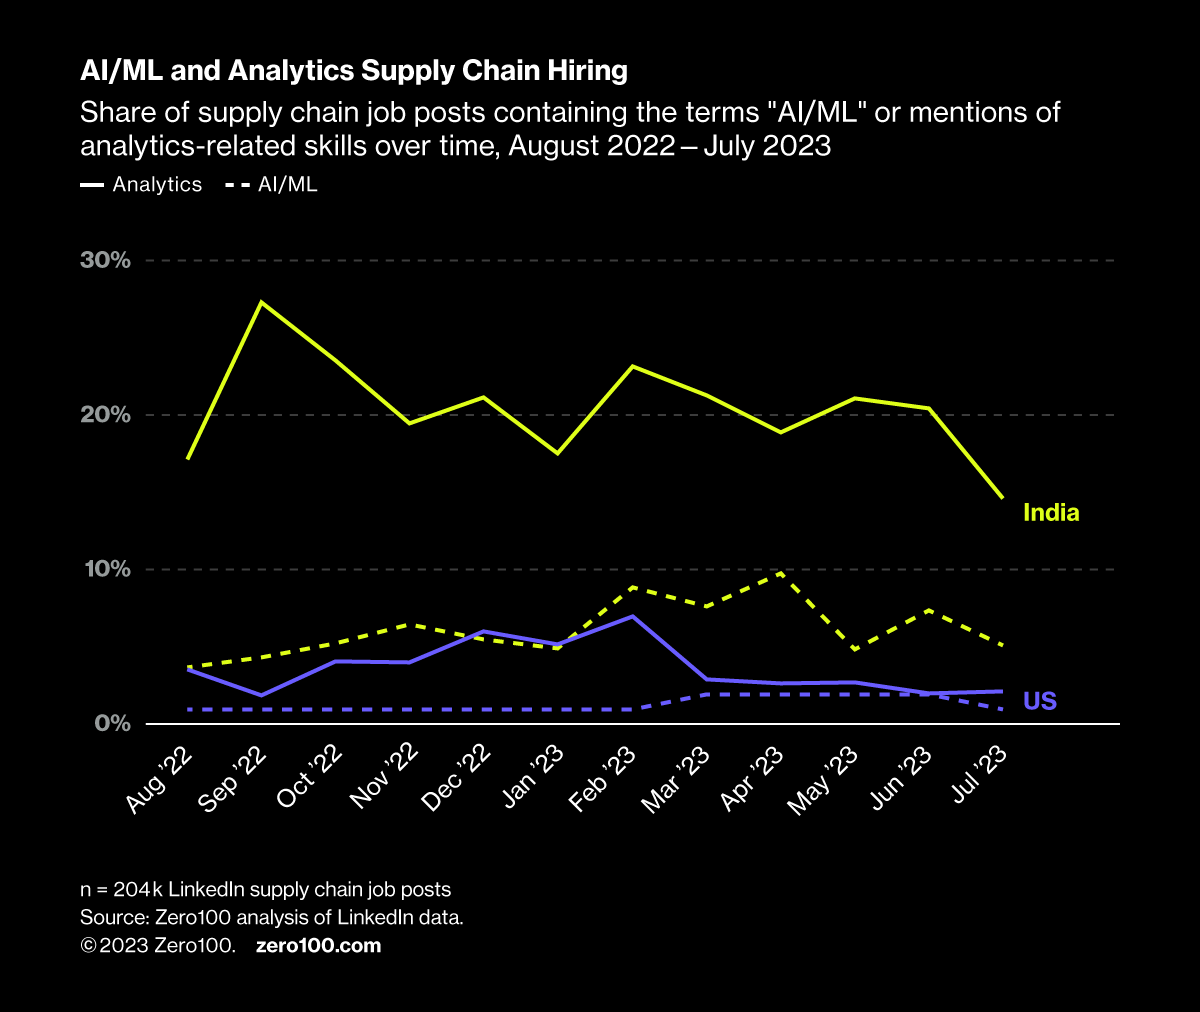 Graph depicting share of supply chain job posts containing the terms "AI/ML" or mentions of analytics-related skills over time, August 2022 - July 2023.